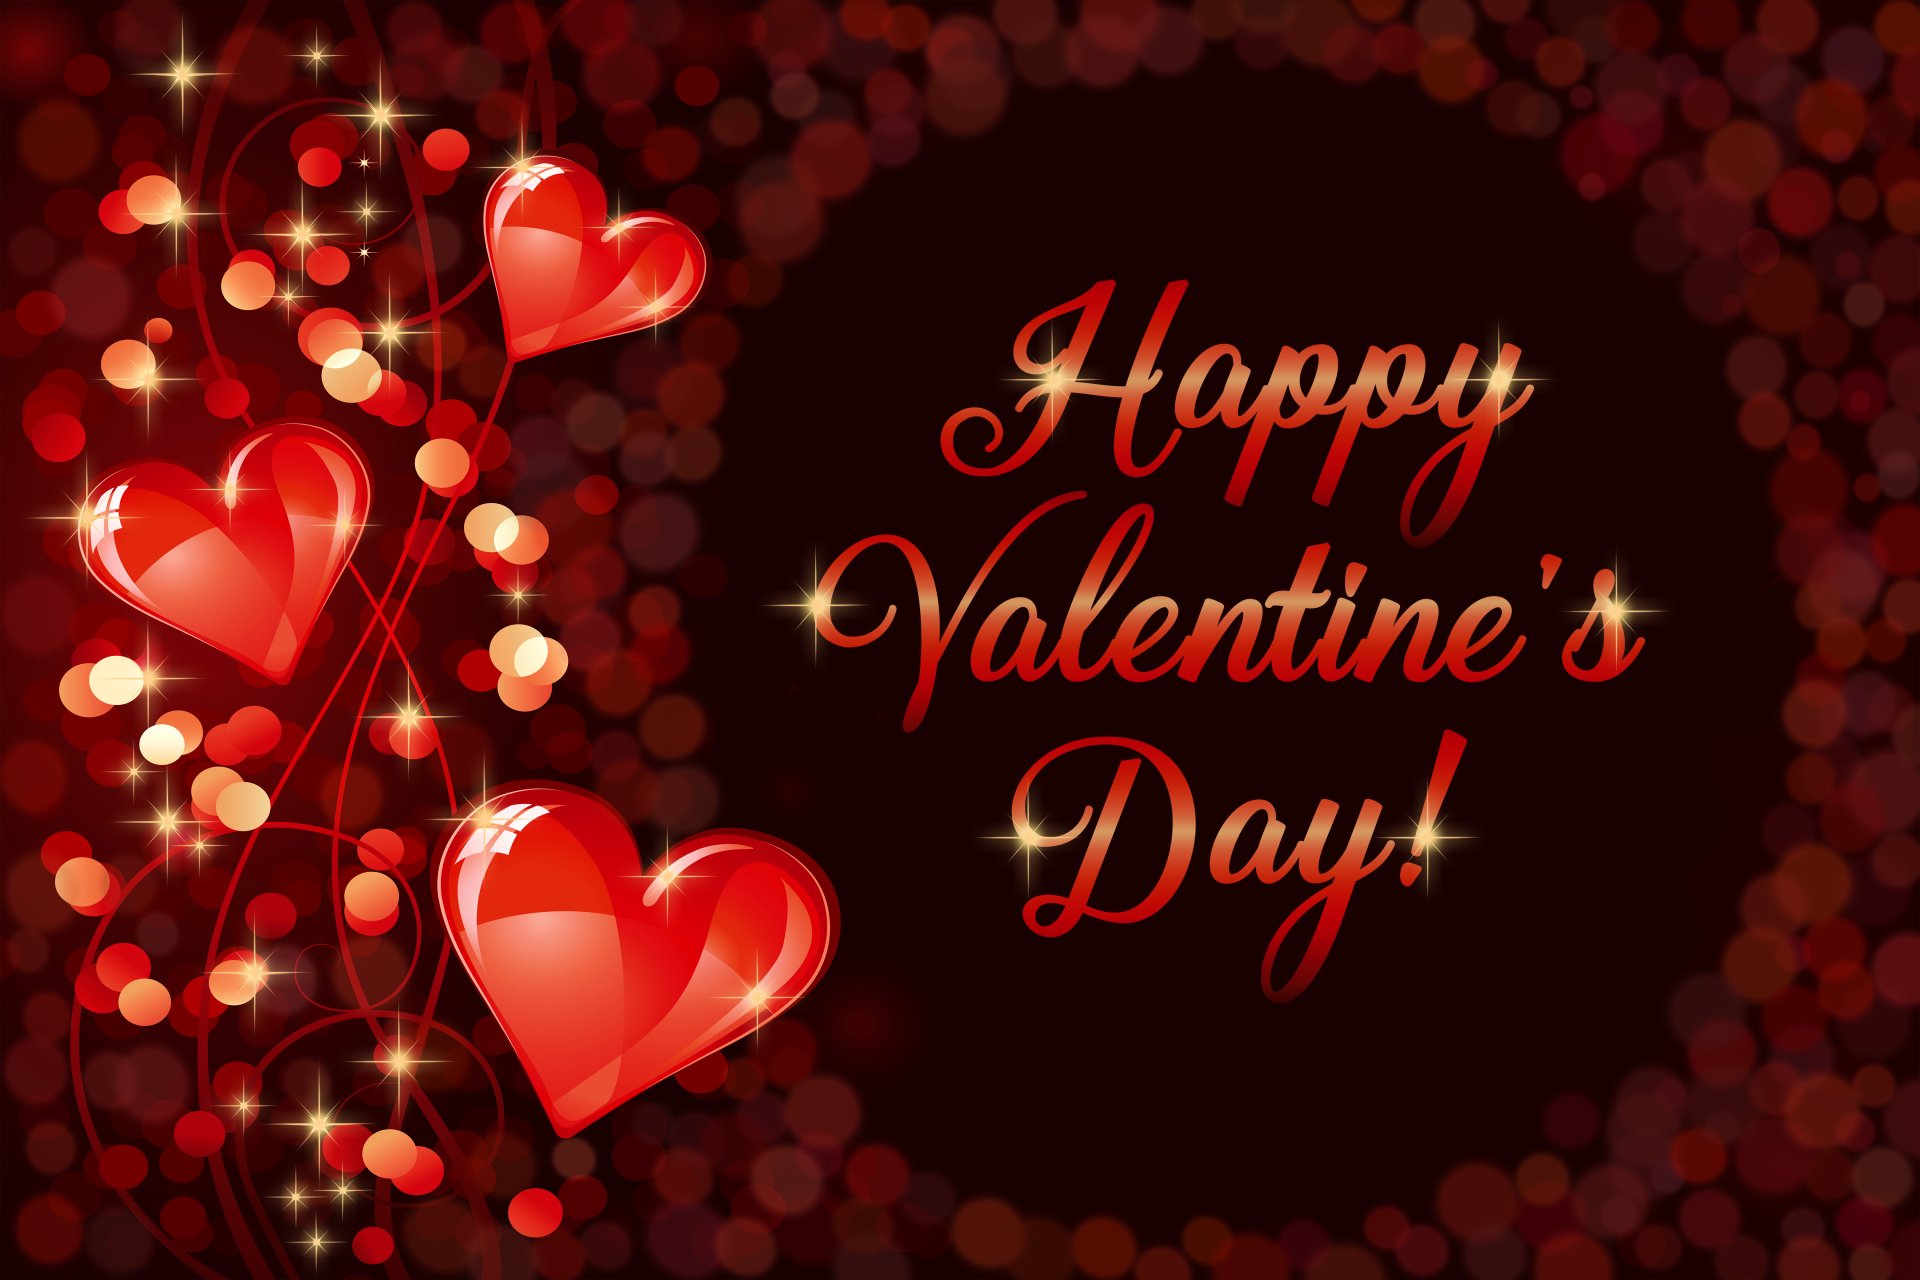 Download Happy Valentine's Day Red Heart Love Romantic Holiday Valentine's Day  4k Ultra HD Wallpaper